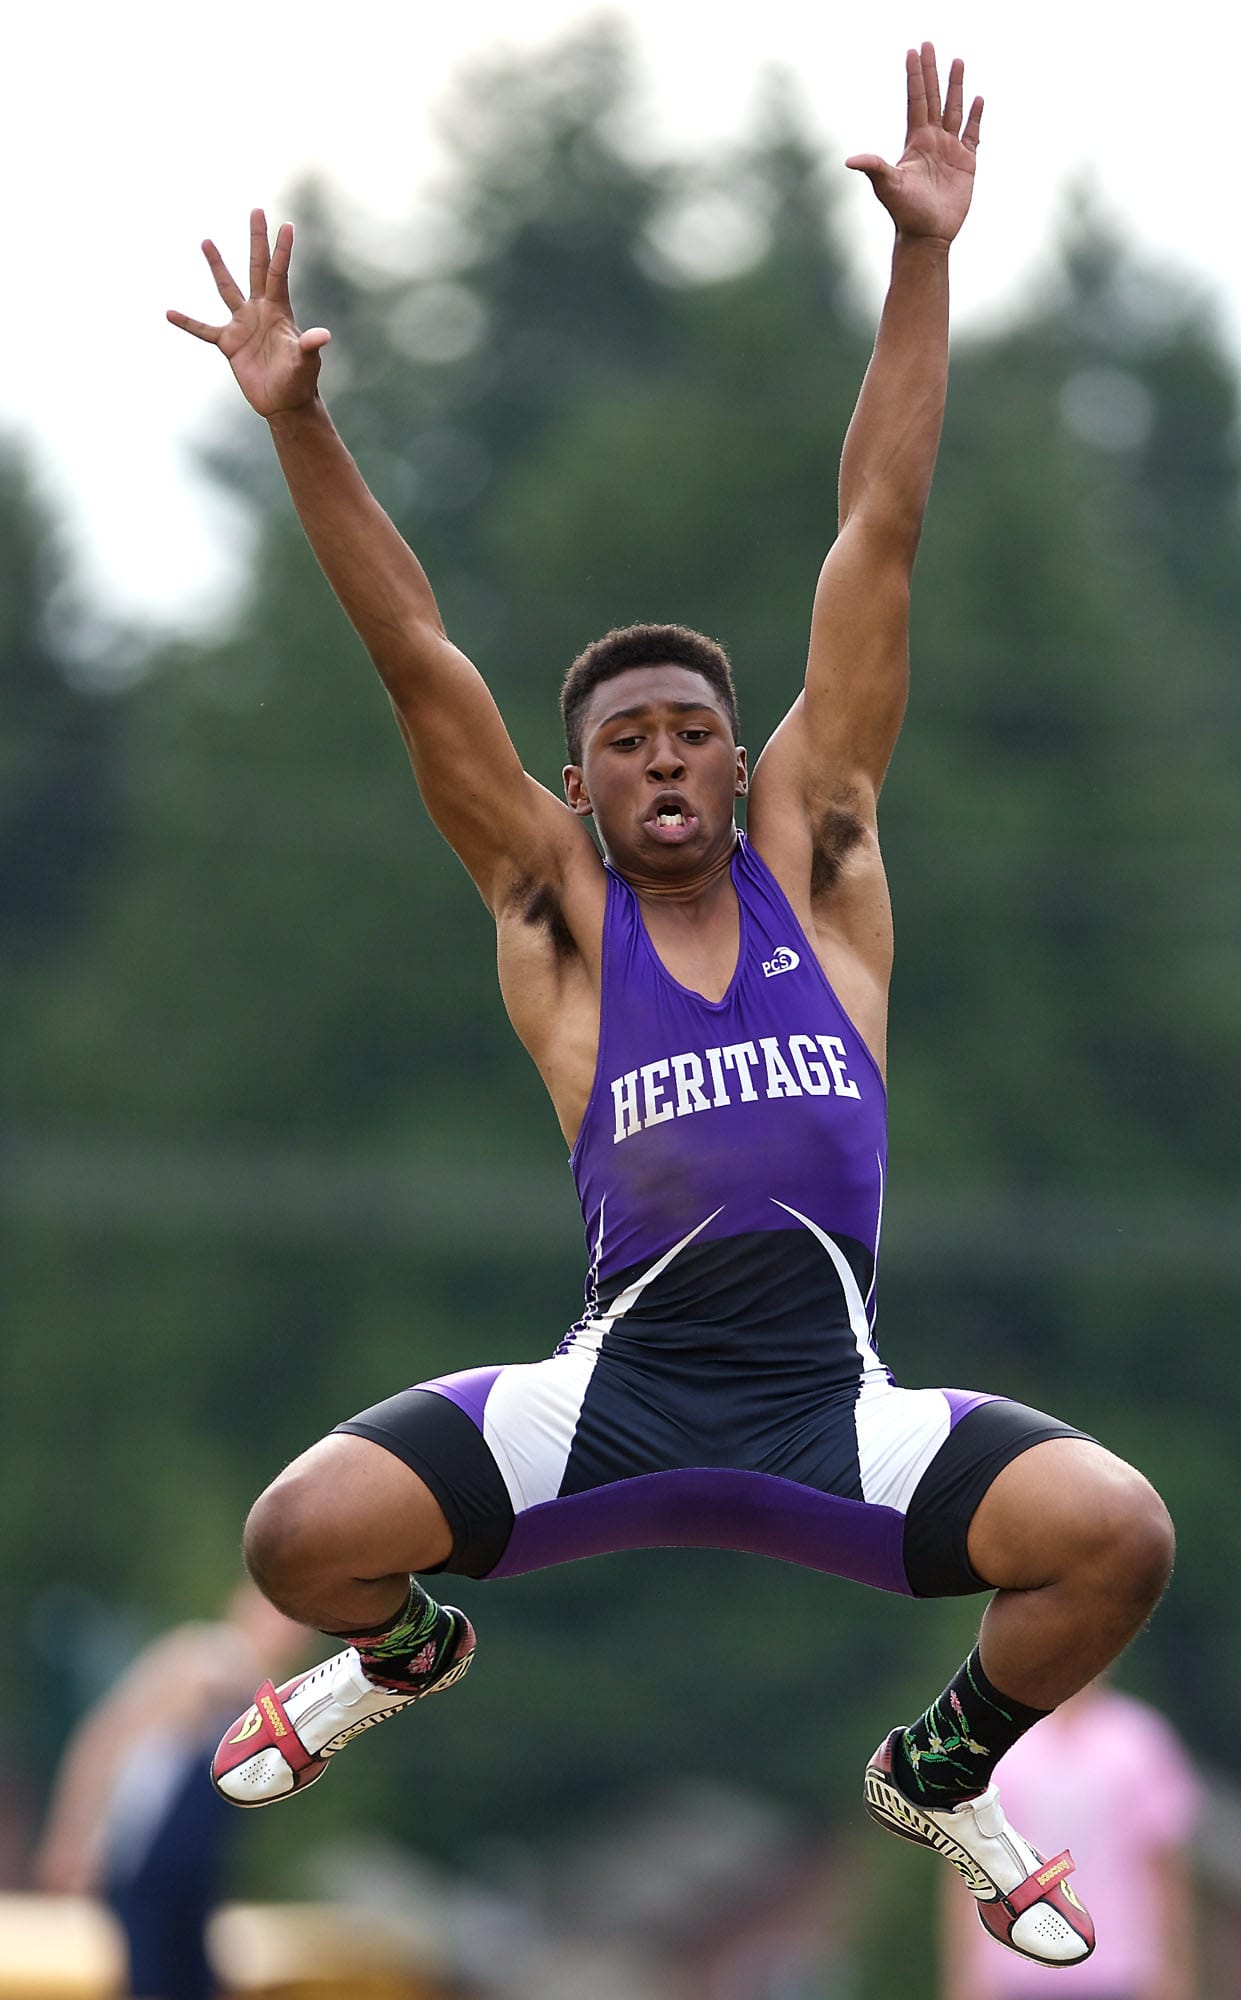 Heritage High School's Devin Murphy jumps 21 feet, 7.5 inches to win the 4A long jump at the district track meet at McKenzie Stadium on Thursday.